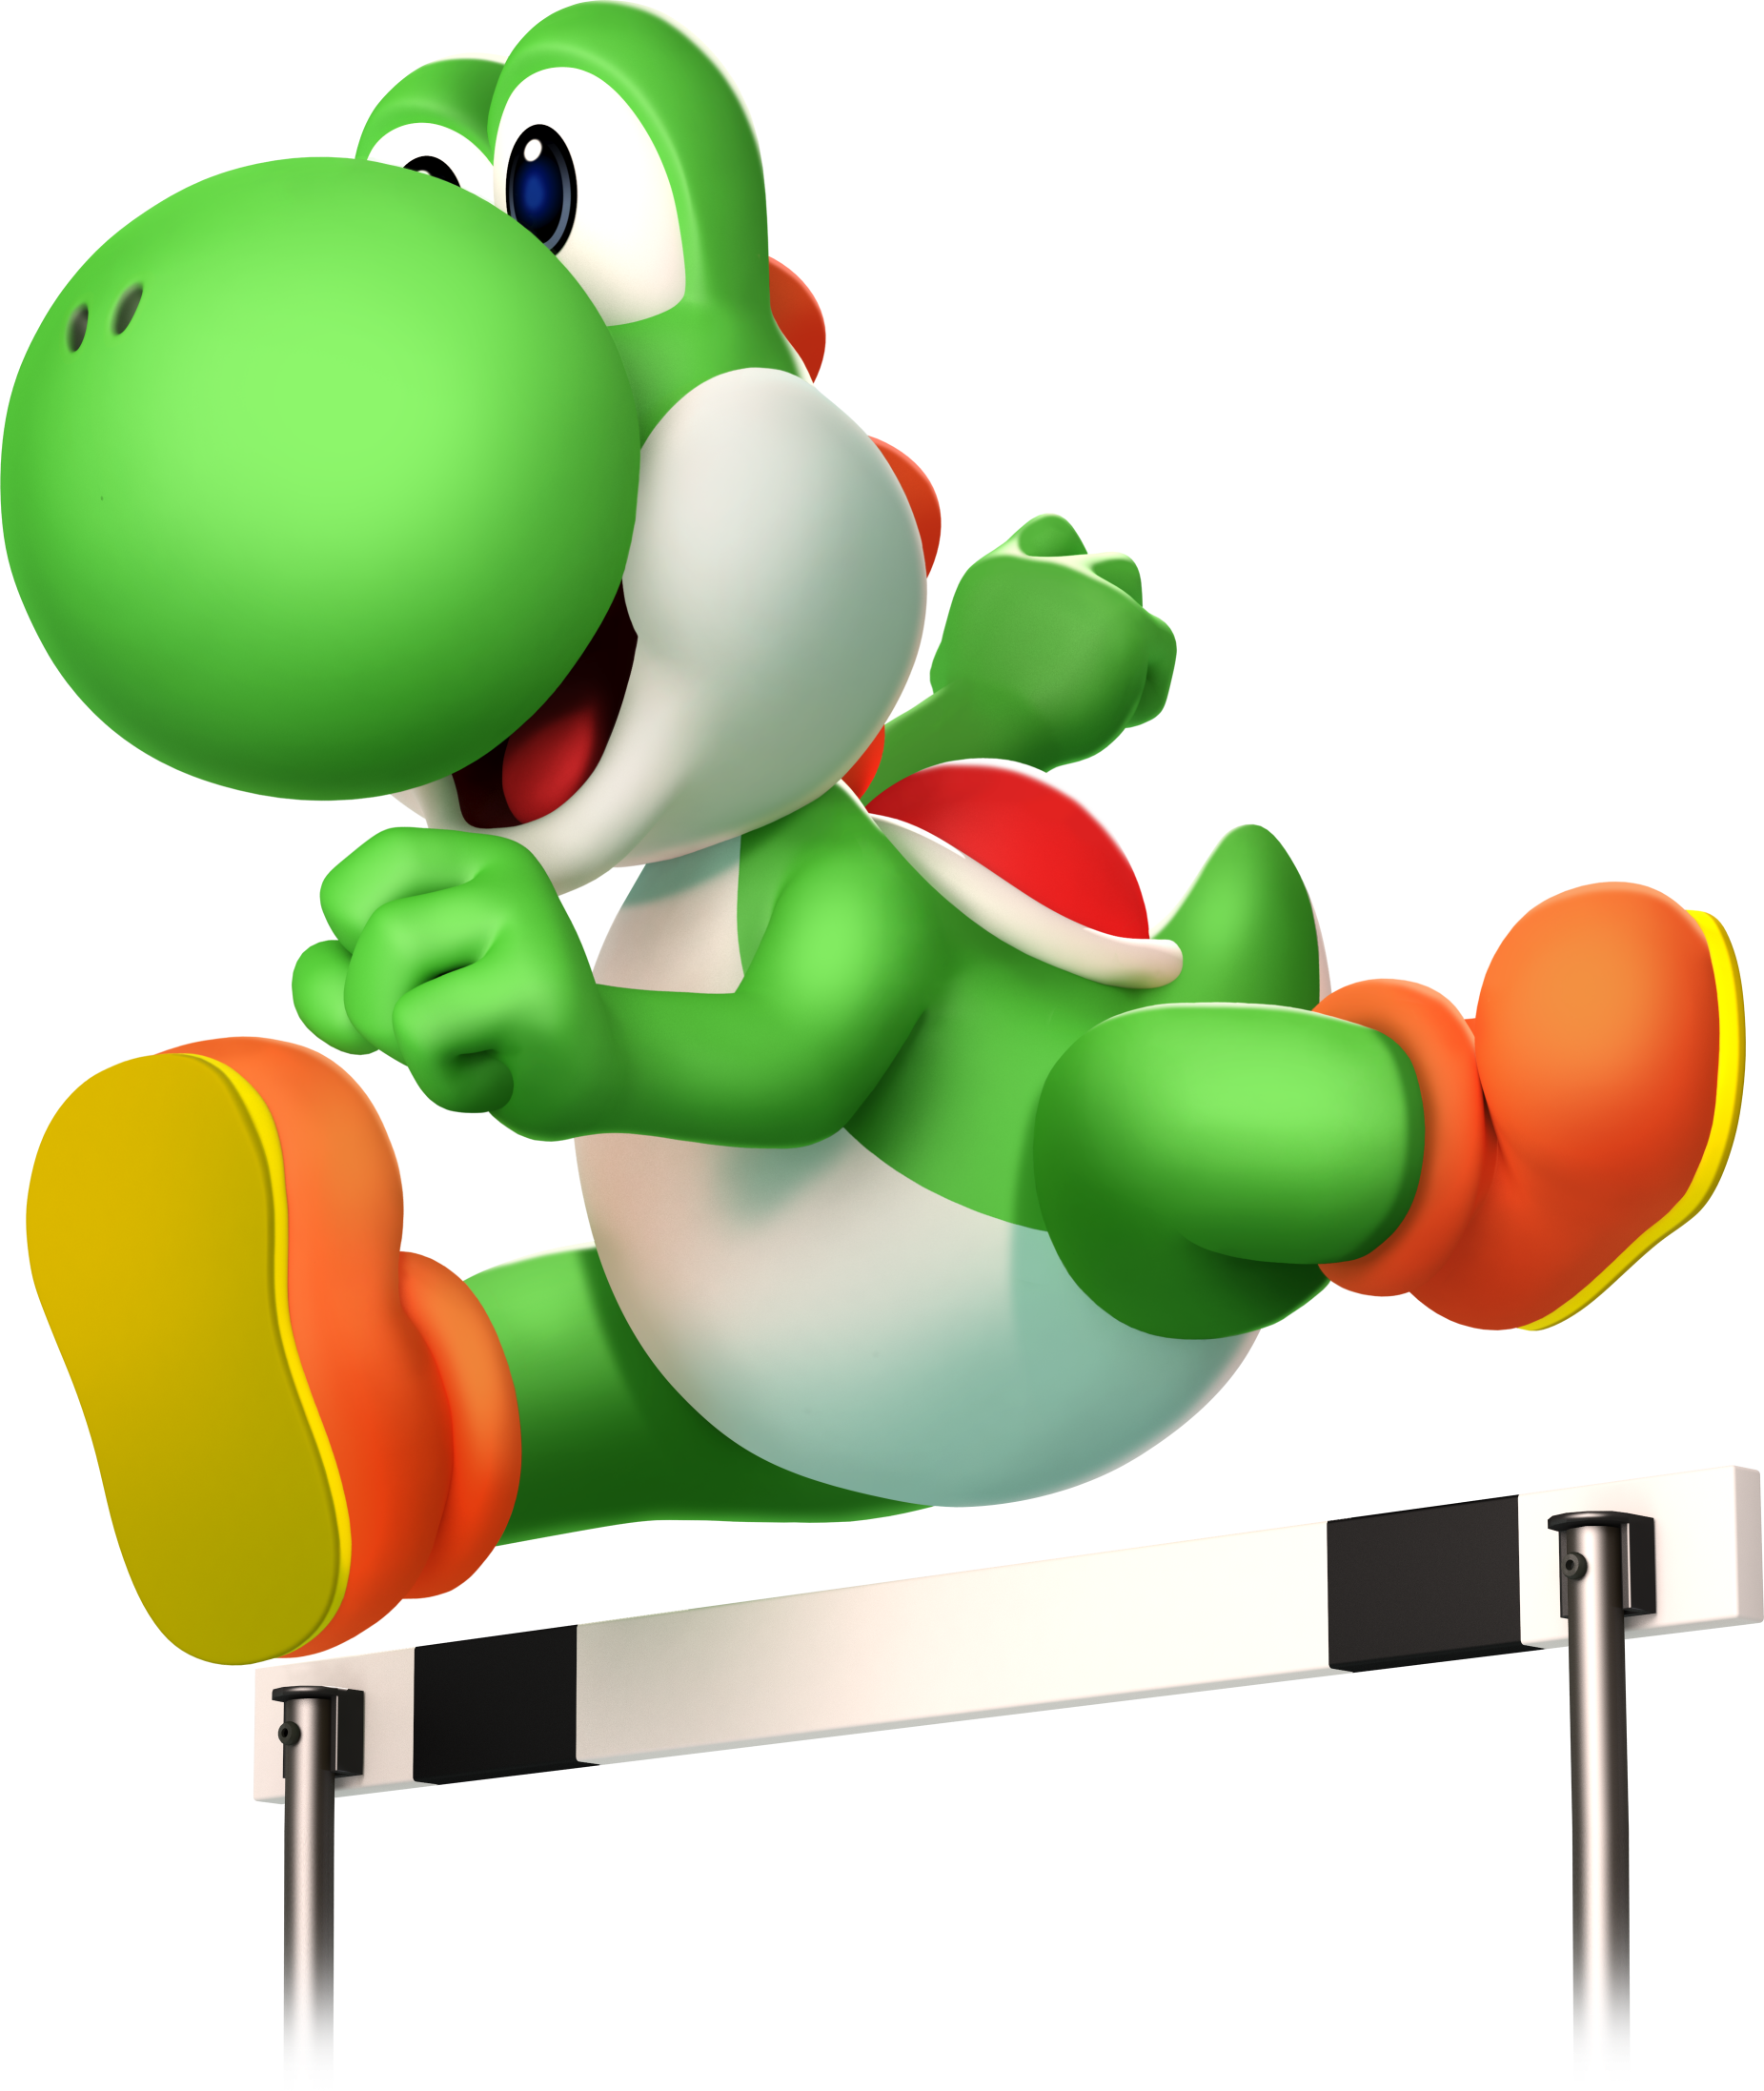 Yoshi PNG Image with Transparent Background | PNG Arts